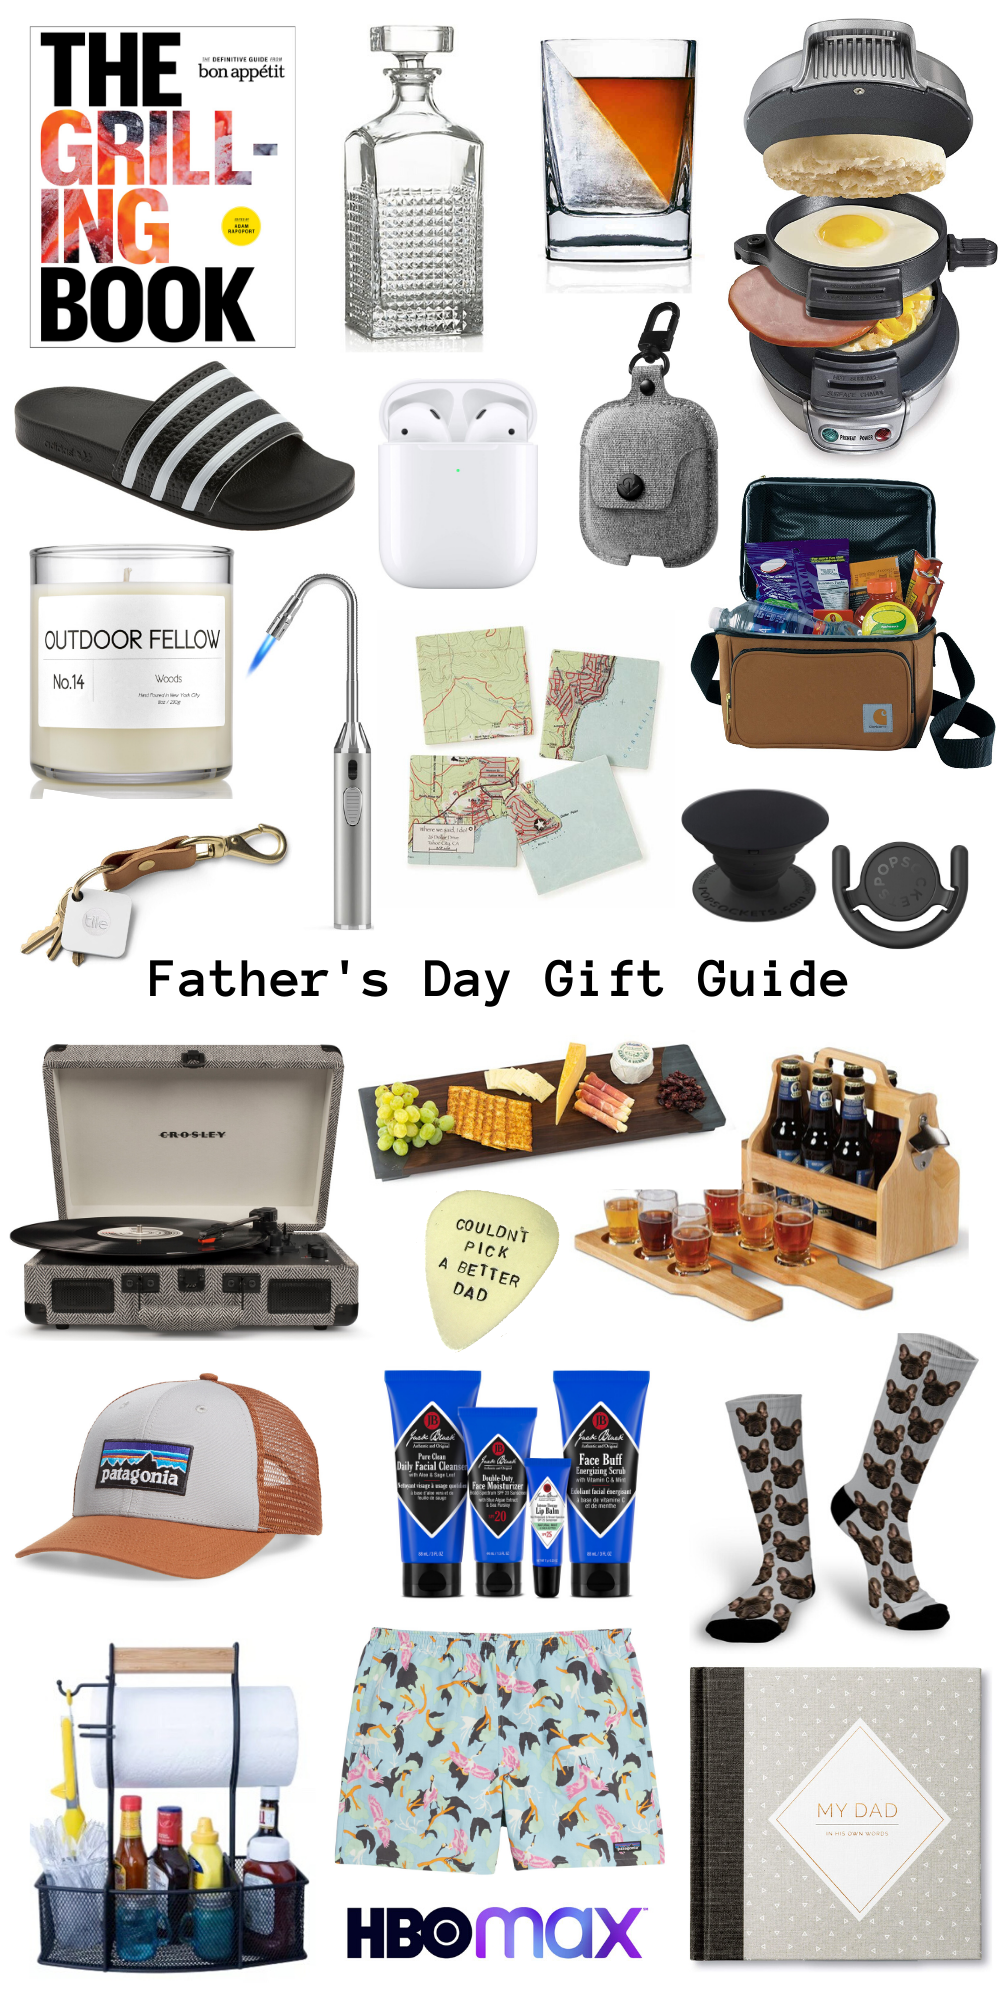 https://www.chloandtell.com/wp-content/uploads/2020/06/Fathers-Day-Gift-Guide.png